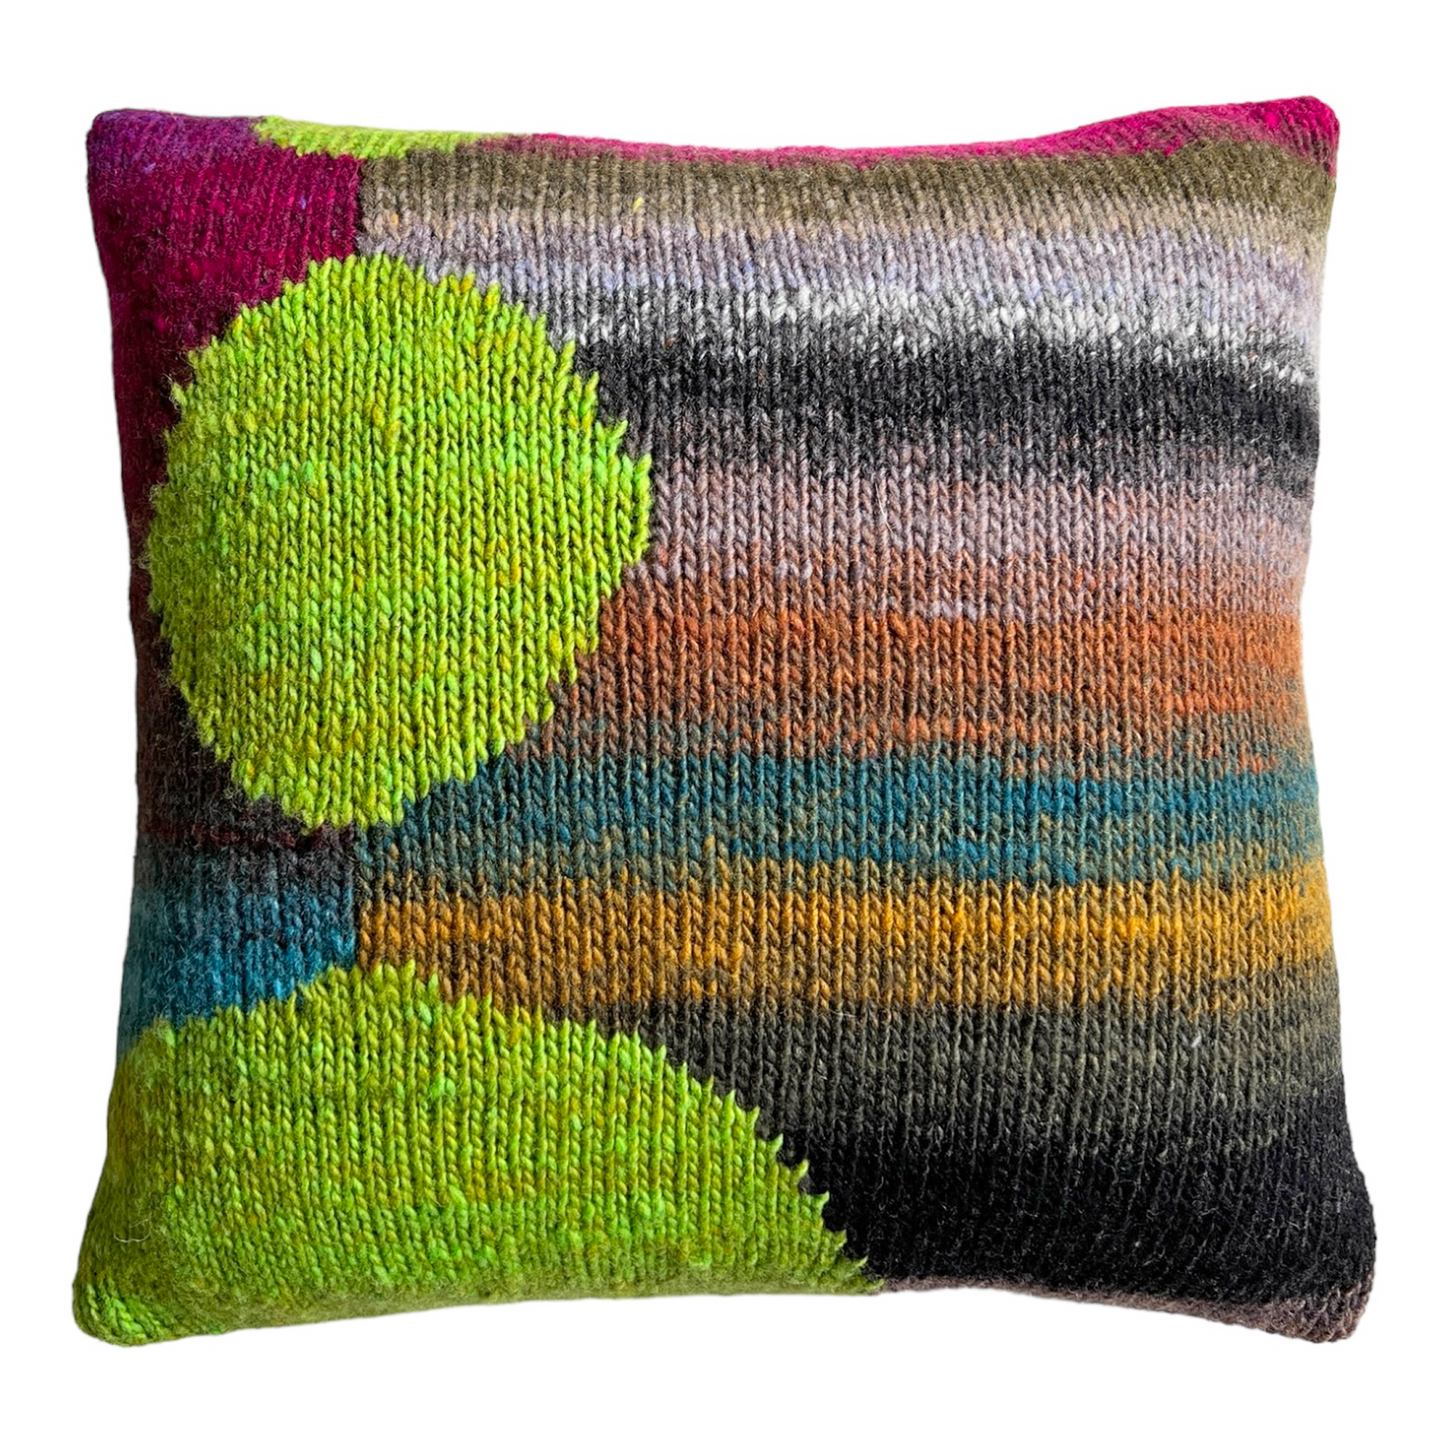 The hand-knit side of this pillow features a self-striping background in rich earthy tones including charcoal, gold, rust, gray, turquoise, and a hint of magenta. Three unequal spheres in bright lime are stacked vertically along the left side.